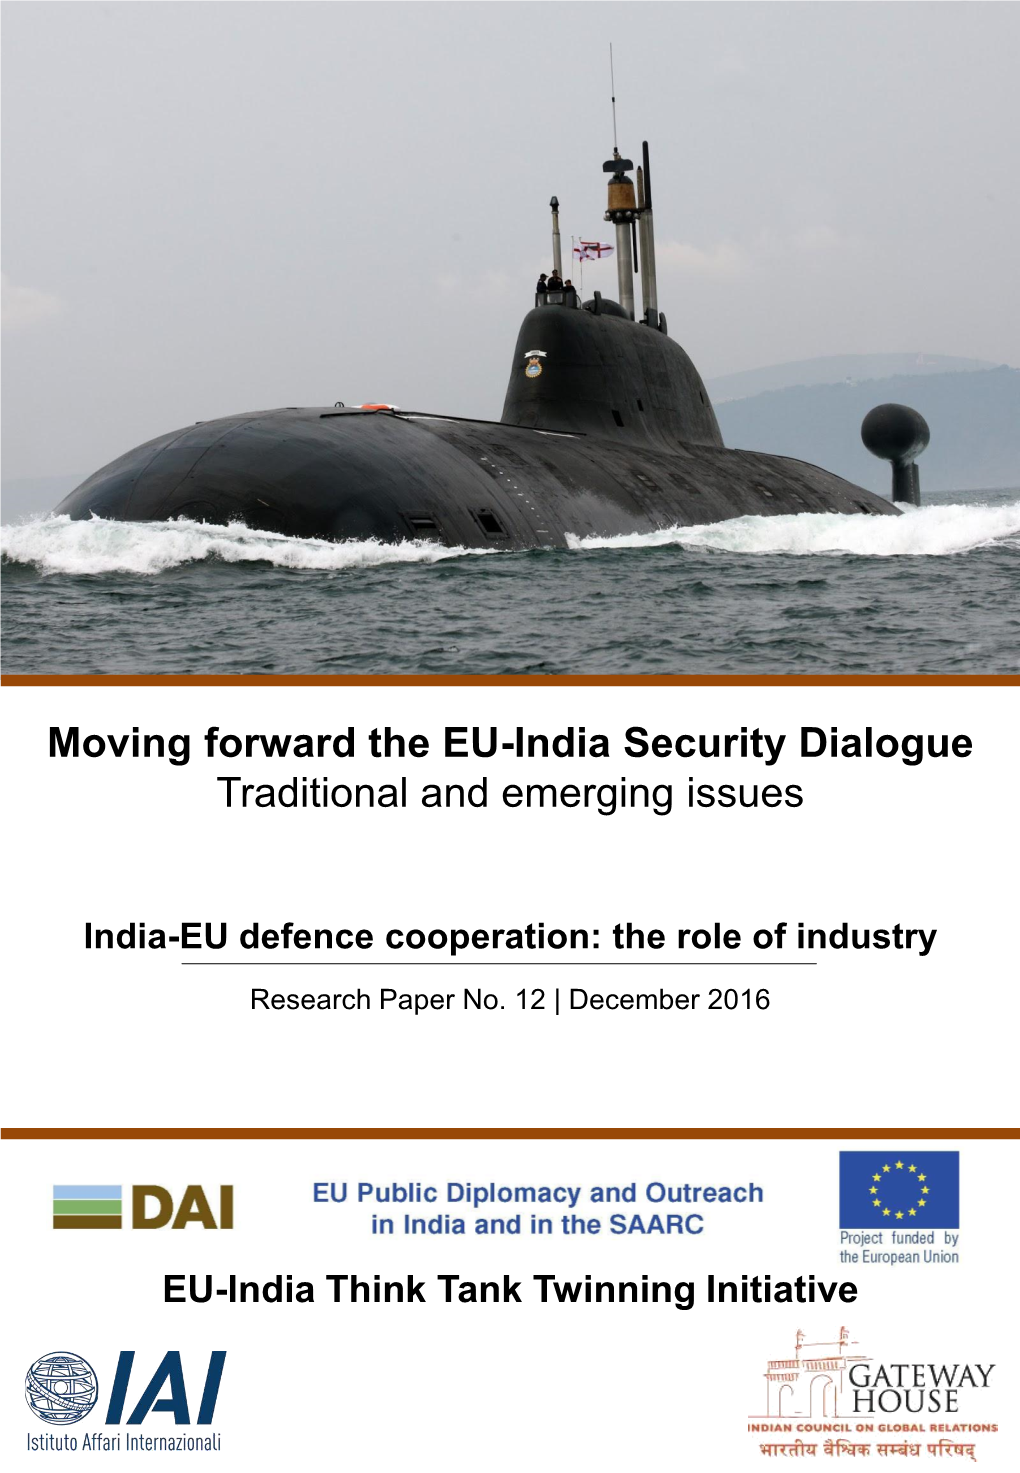 Moving Forward the EU-India Security Dialogue Traditional and Emerging Issues